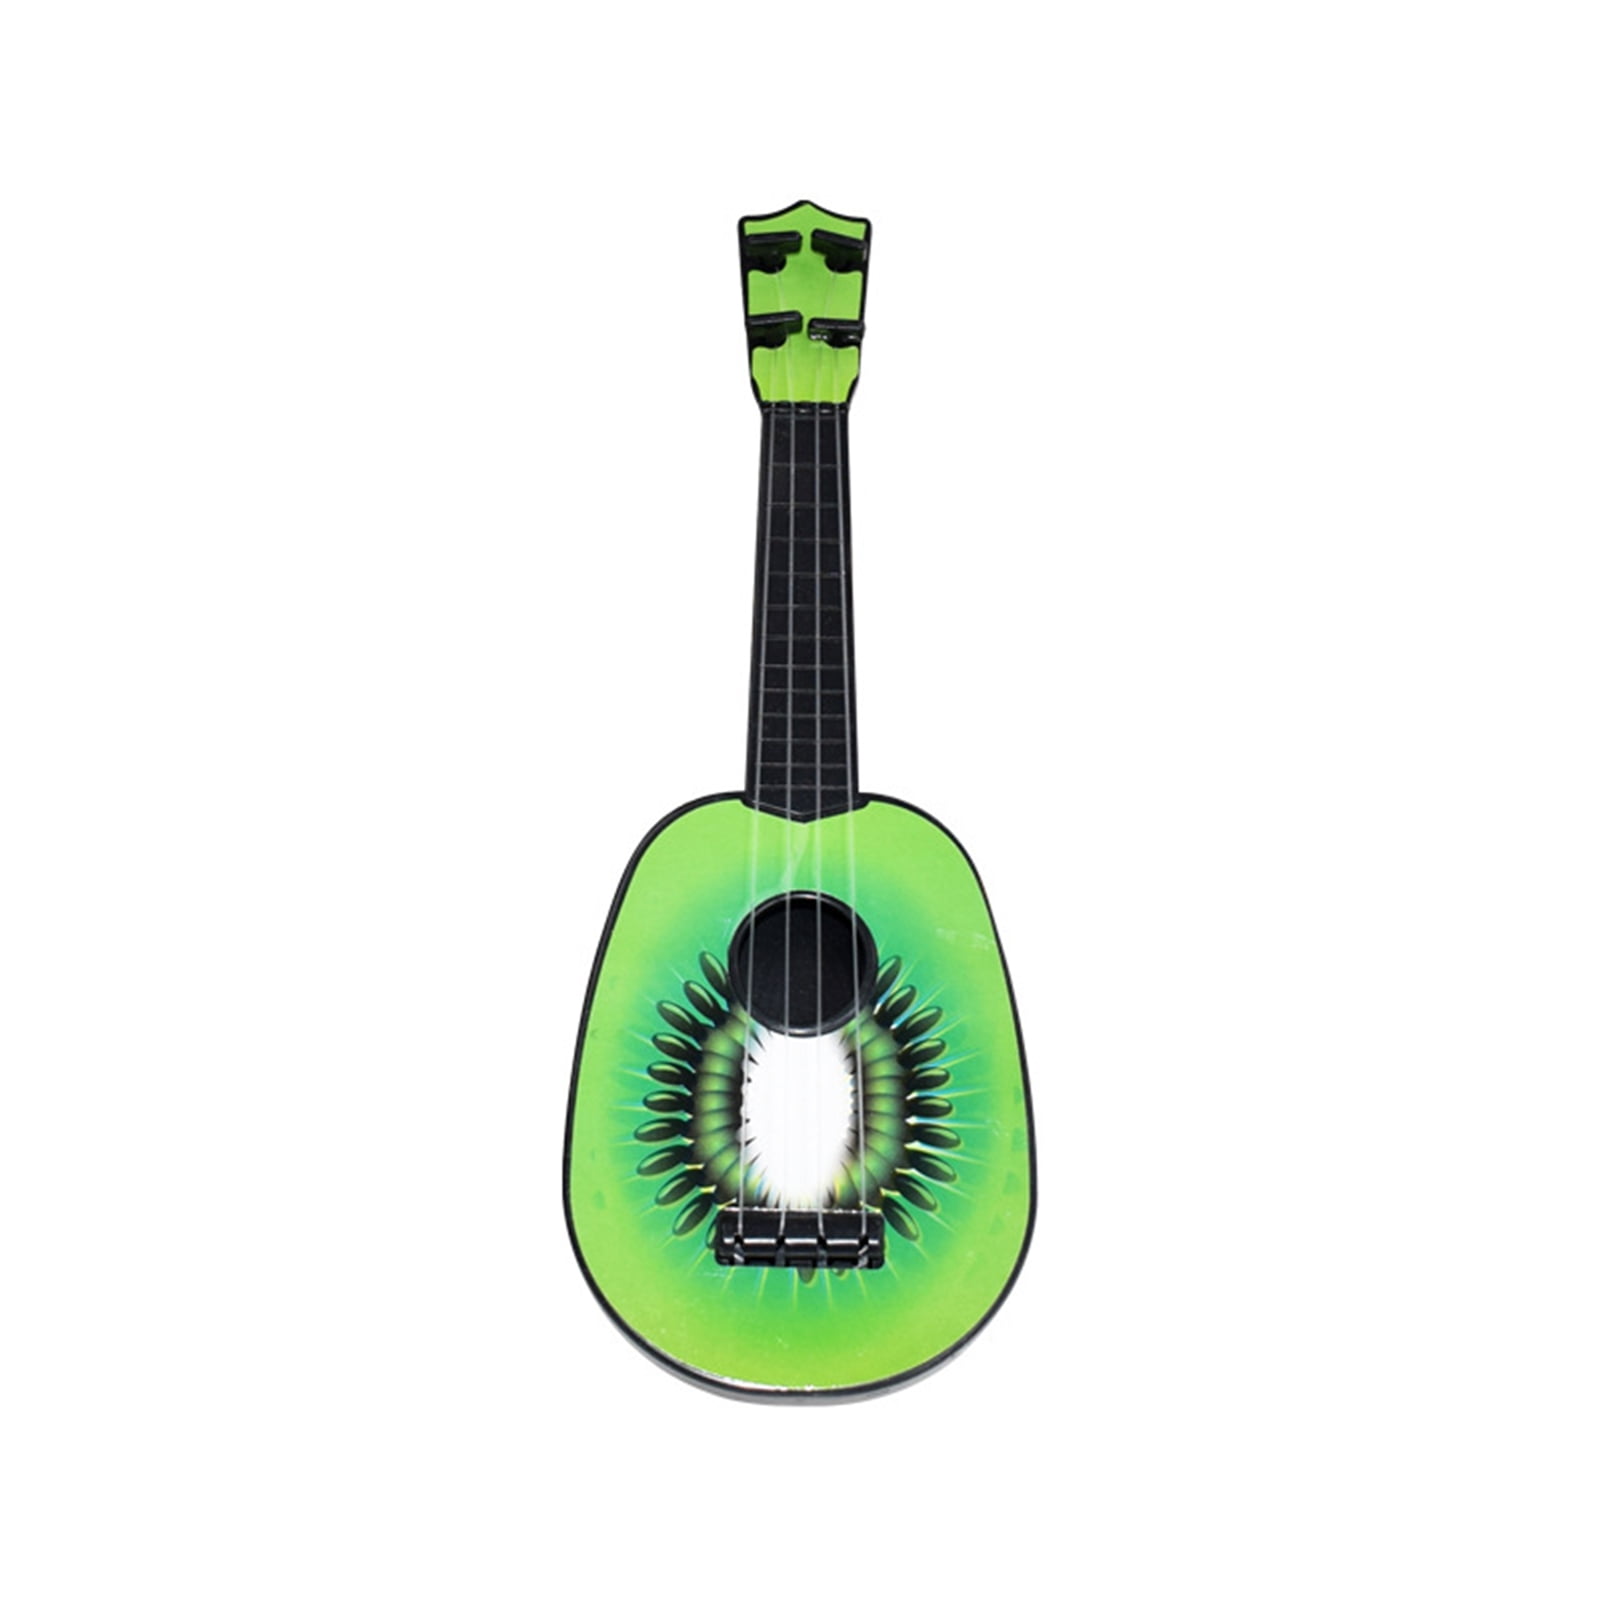 Mini Ukulele Simulation Guitar Kids Musical Instruments Toy Best Gifts For Kids 